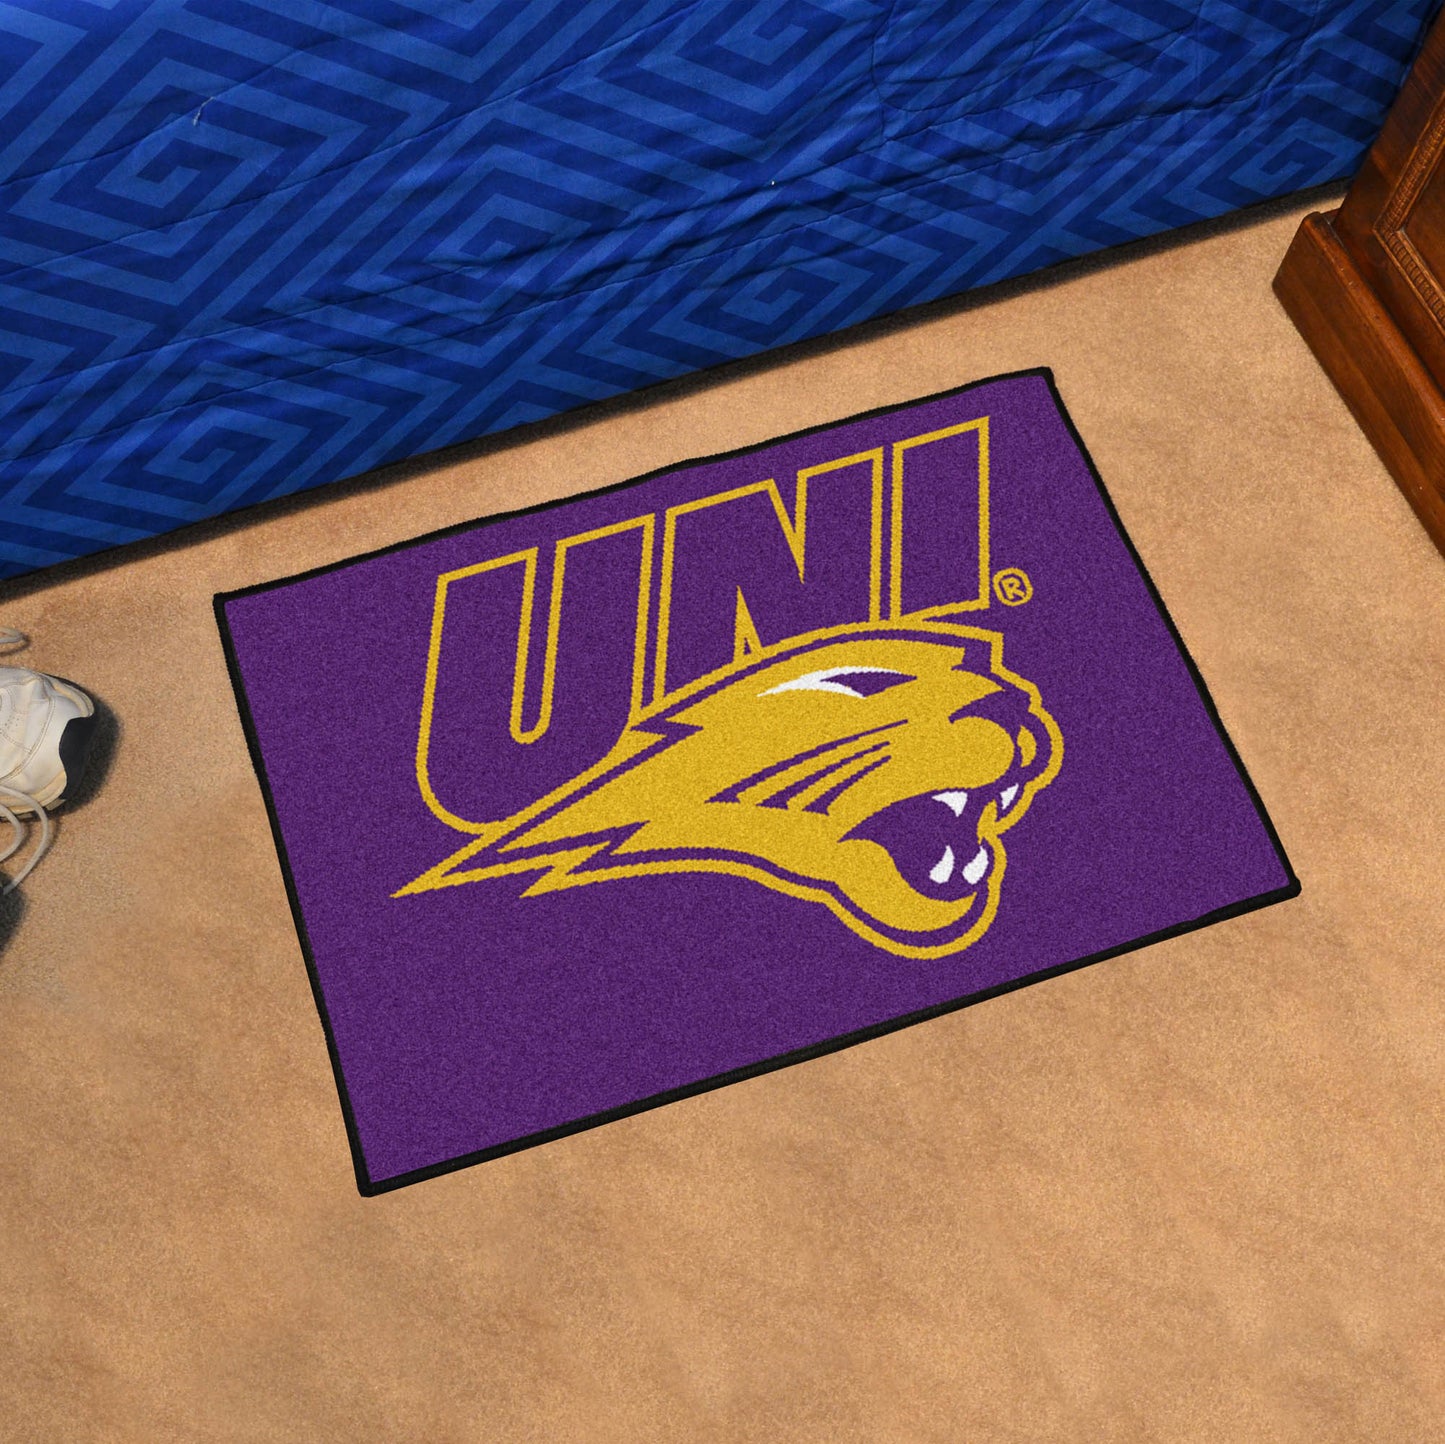 Northern Iowa Panthers Starter Mat Accent Rug - 19in. x 30in.